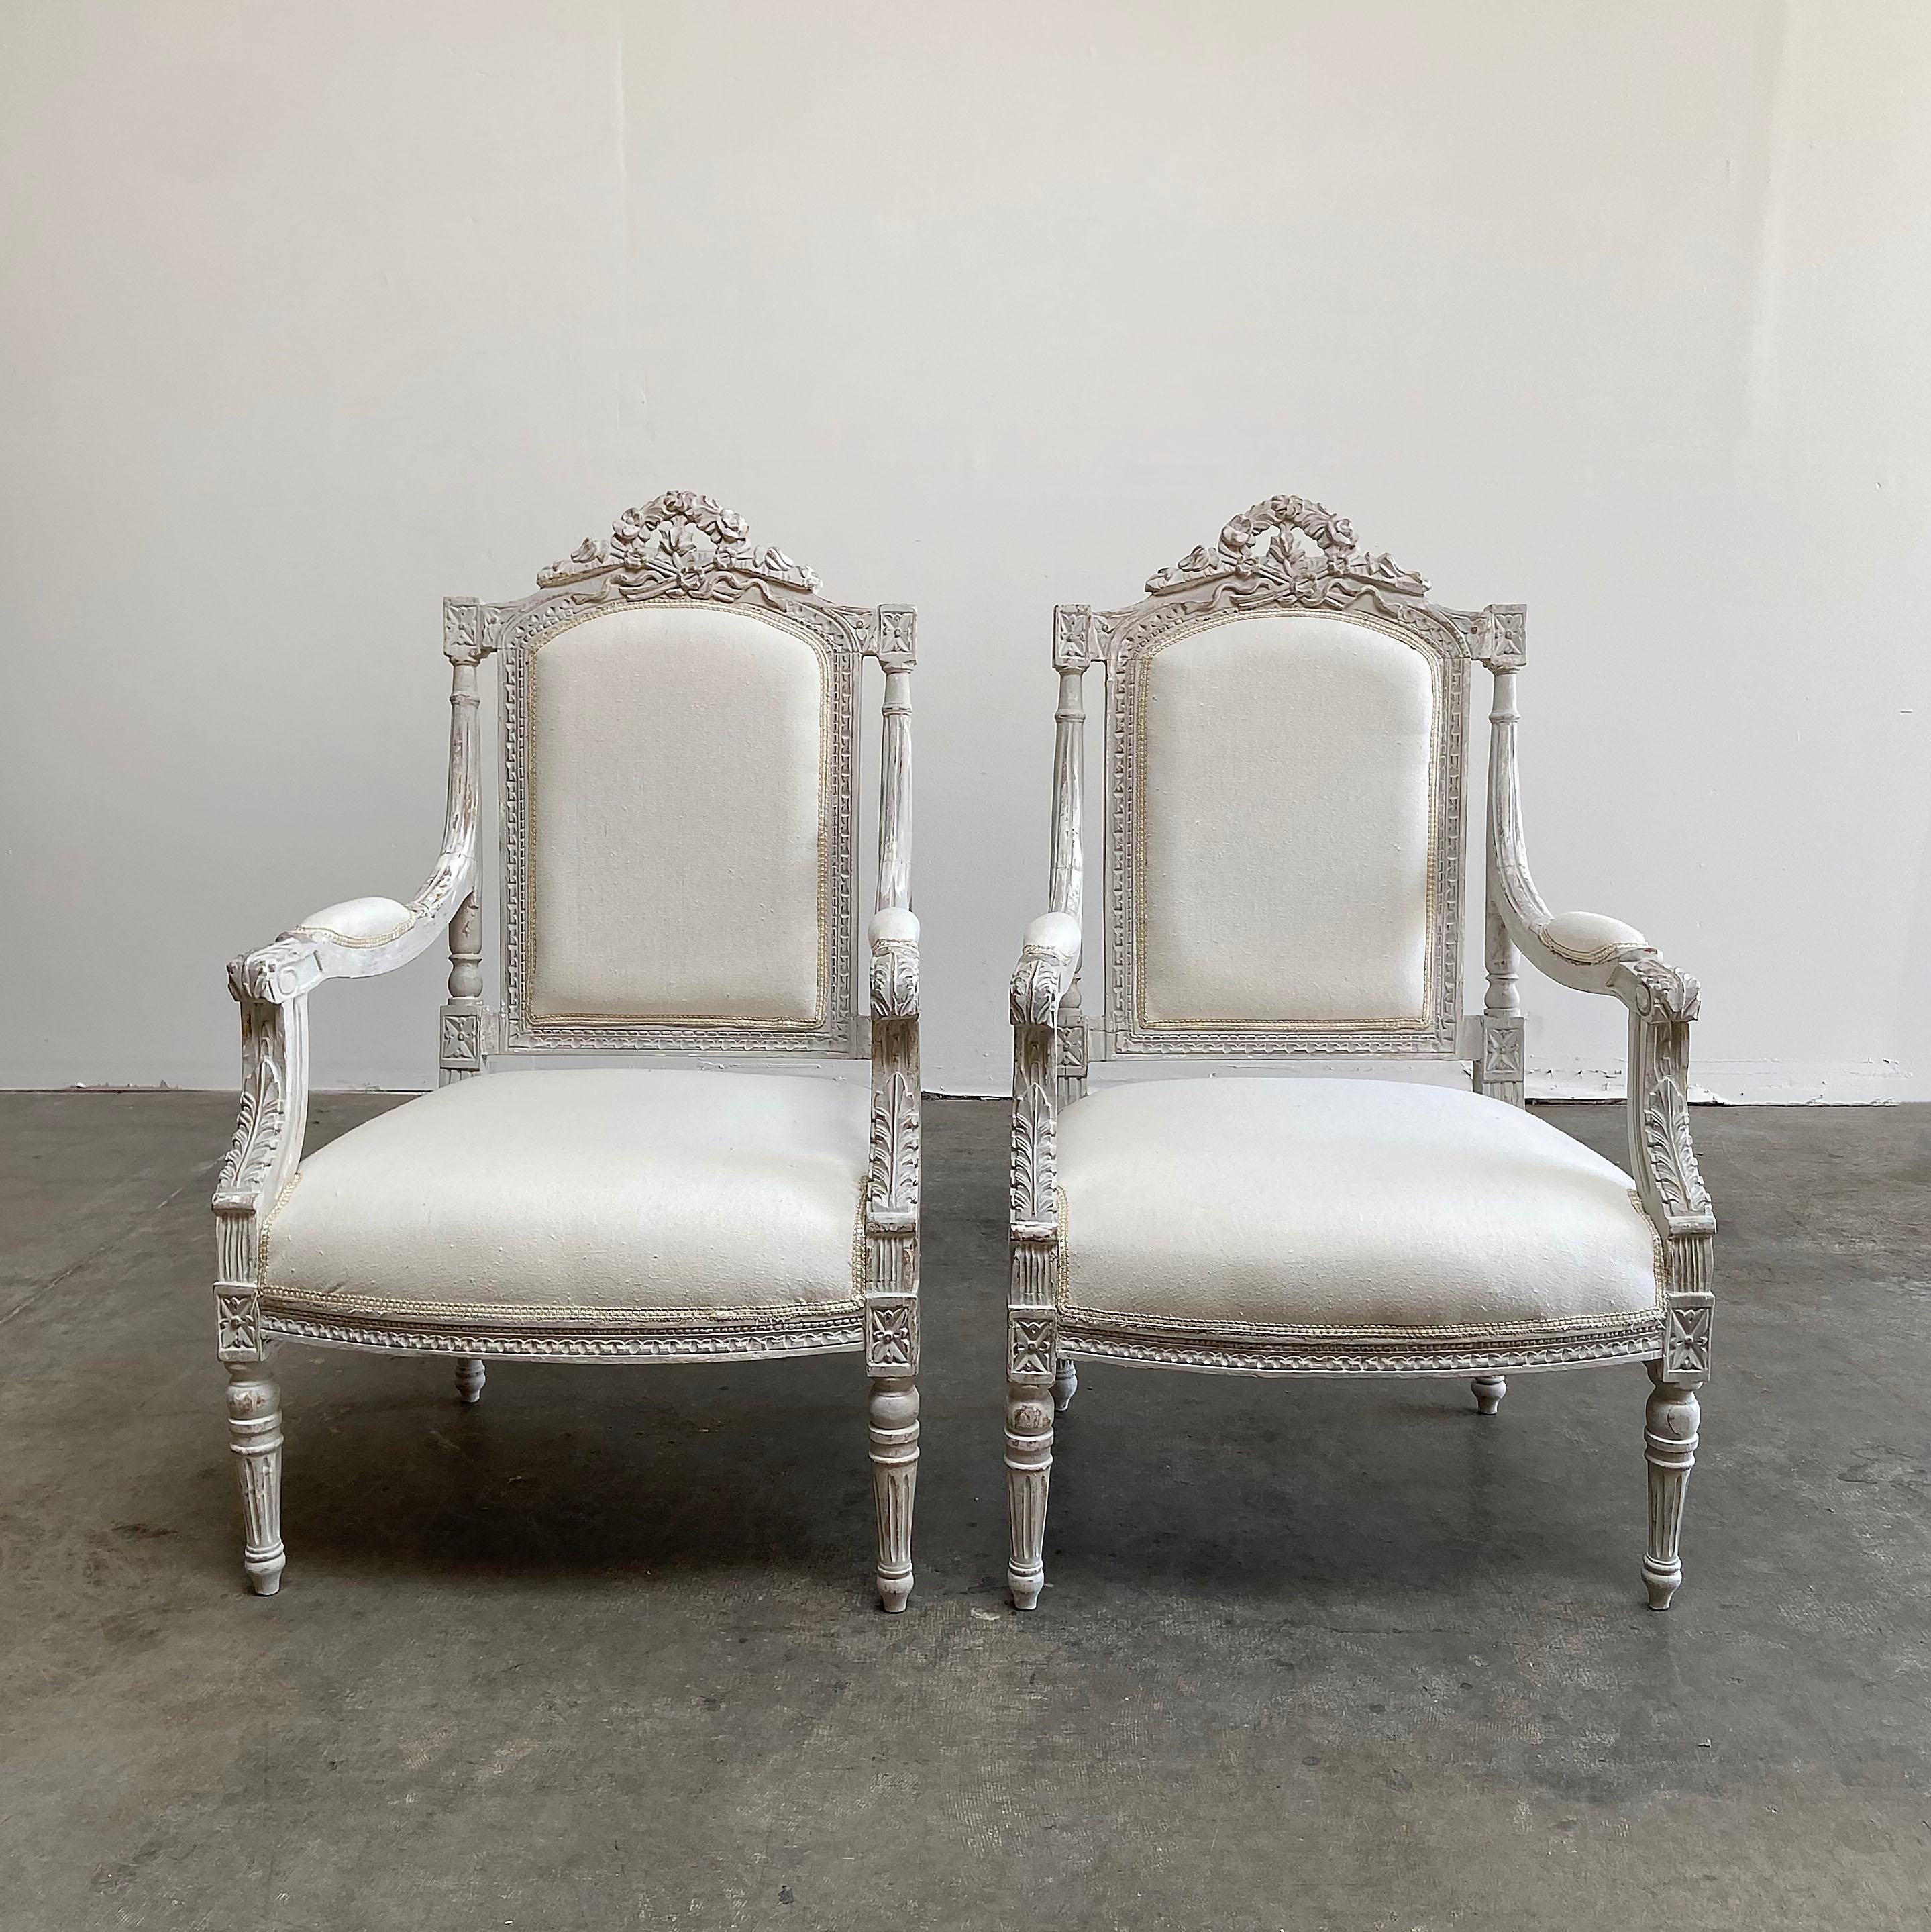 Vintage pair of painted and upholstered Louis XVI style chairs carved roses, flowers and scrolls across the top back, with a sleek fluted Louis XVI style leg. Painted in a layer of Gustavian gray, with antique white, and original gilt peeking